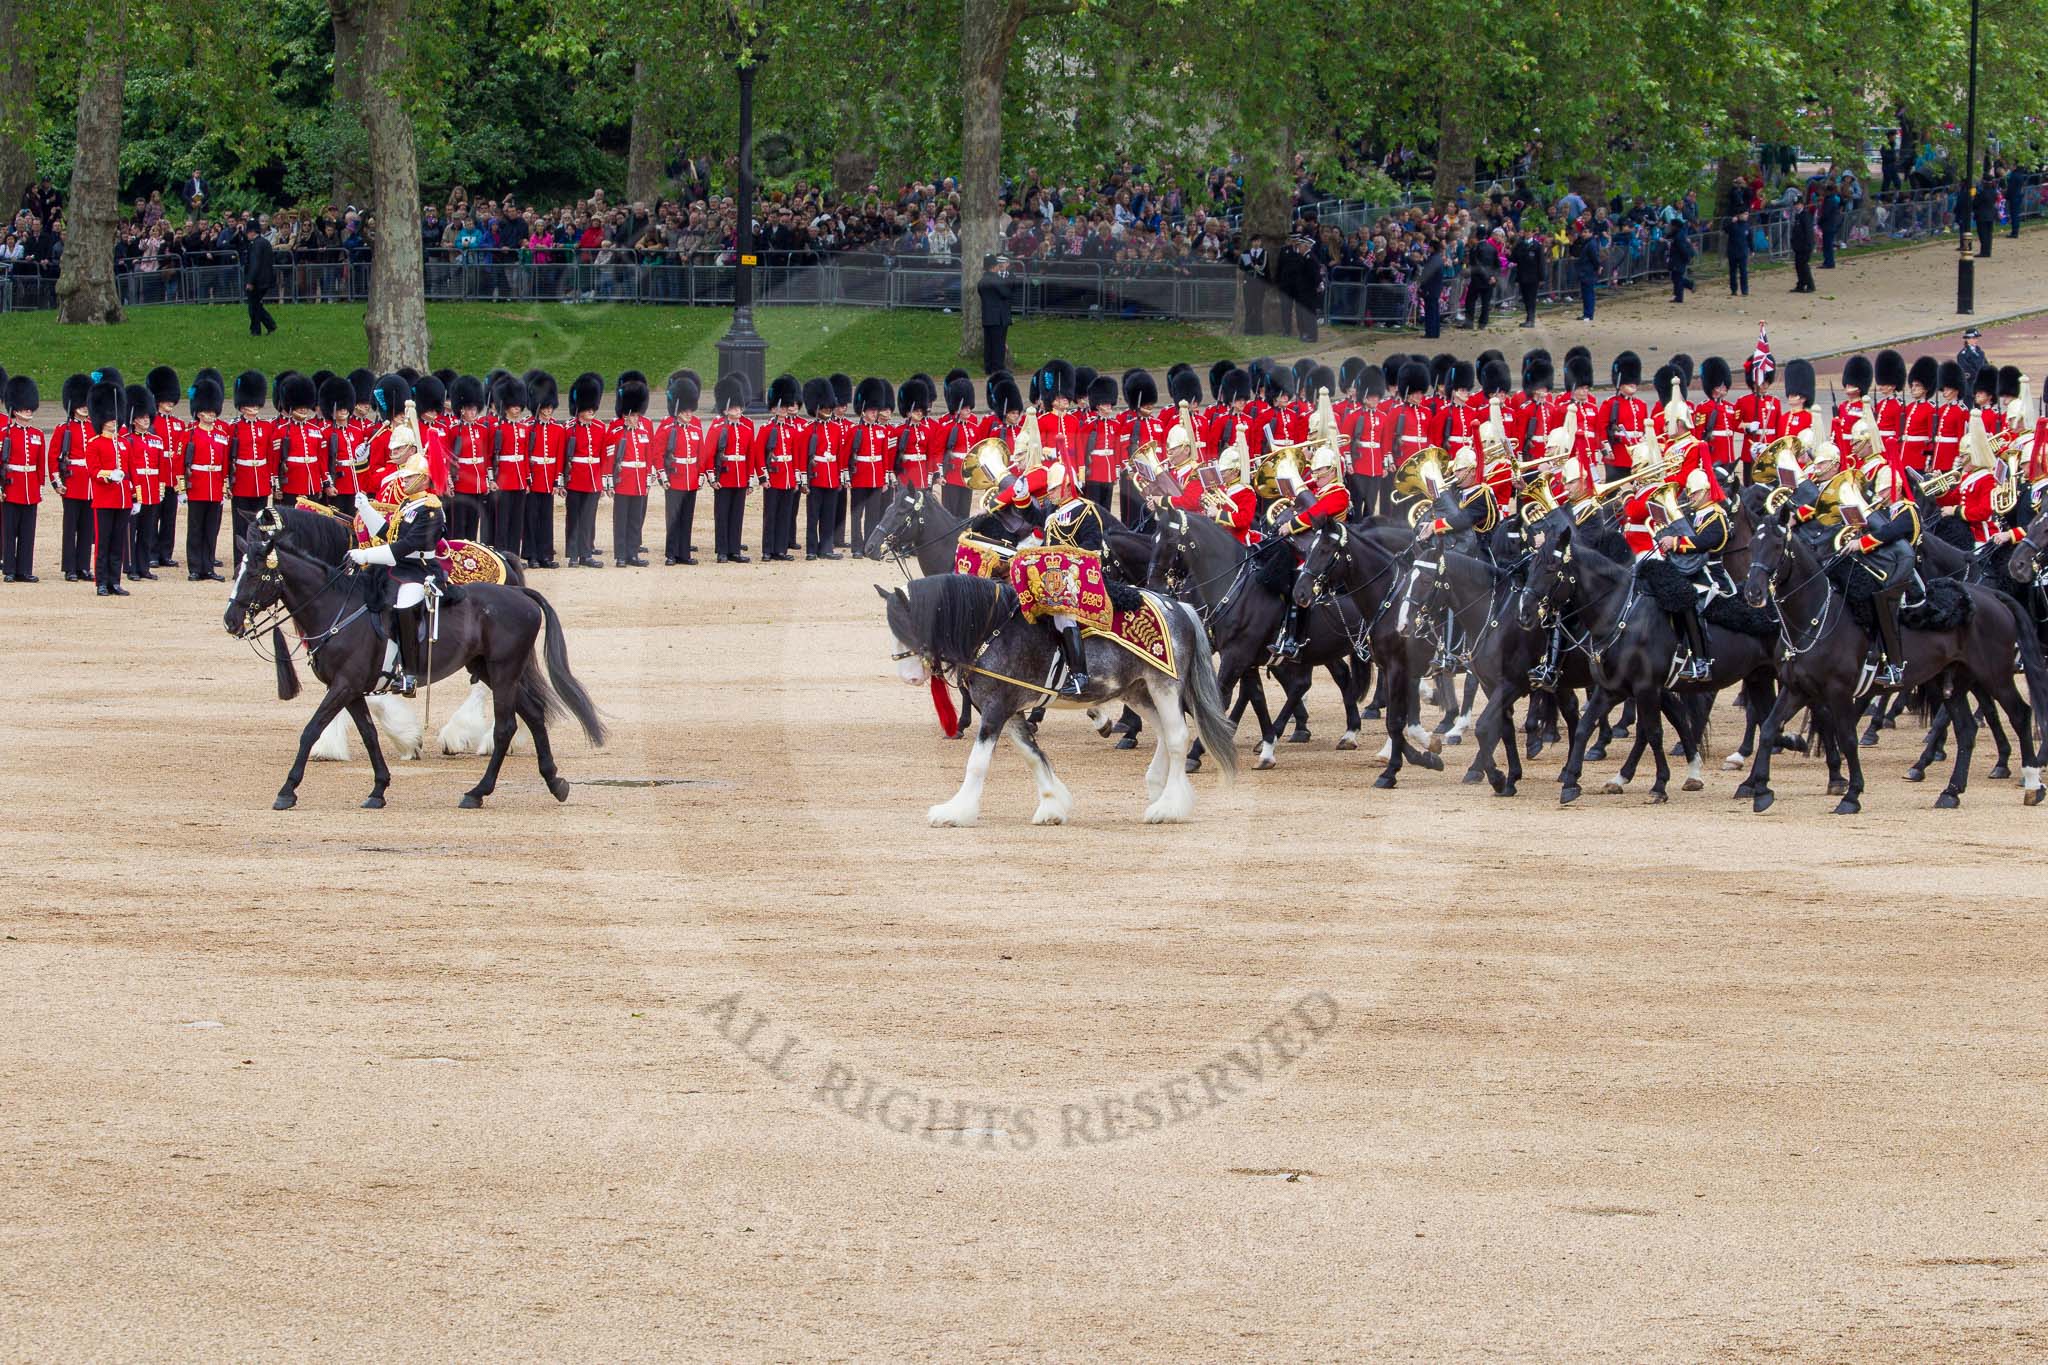 The Colonel's Review 2012: The Mounted Bands of the Household Cavalry start moving during the March Past..
Horse Guards Parade, Westminster,
London SW1,

United Kingdom,
on 09 June 2012 at 11:50, image #384